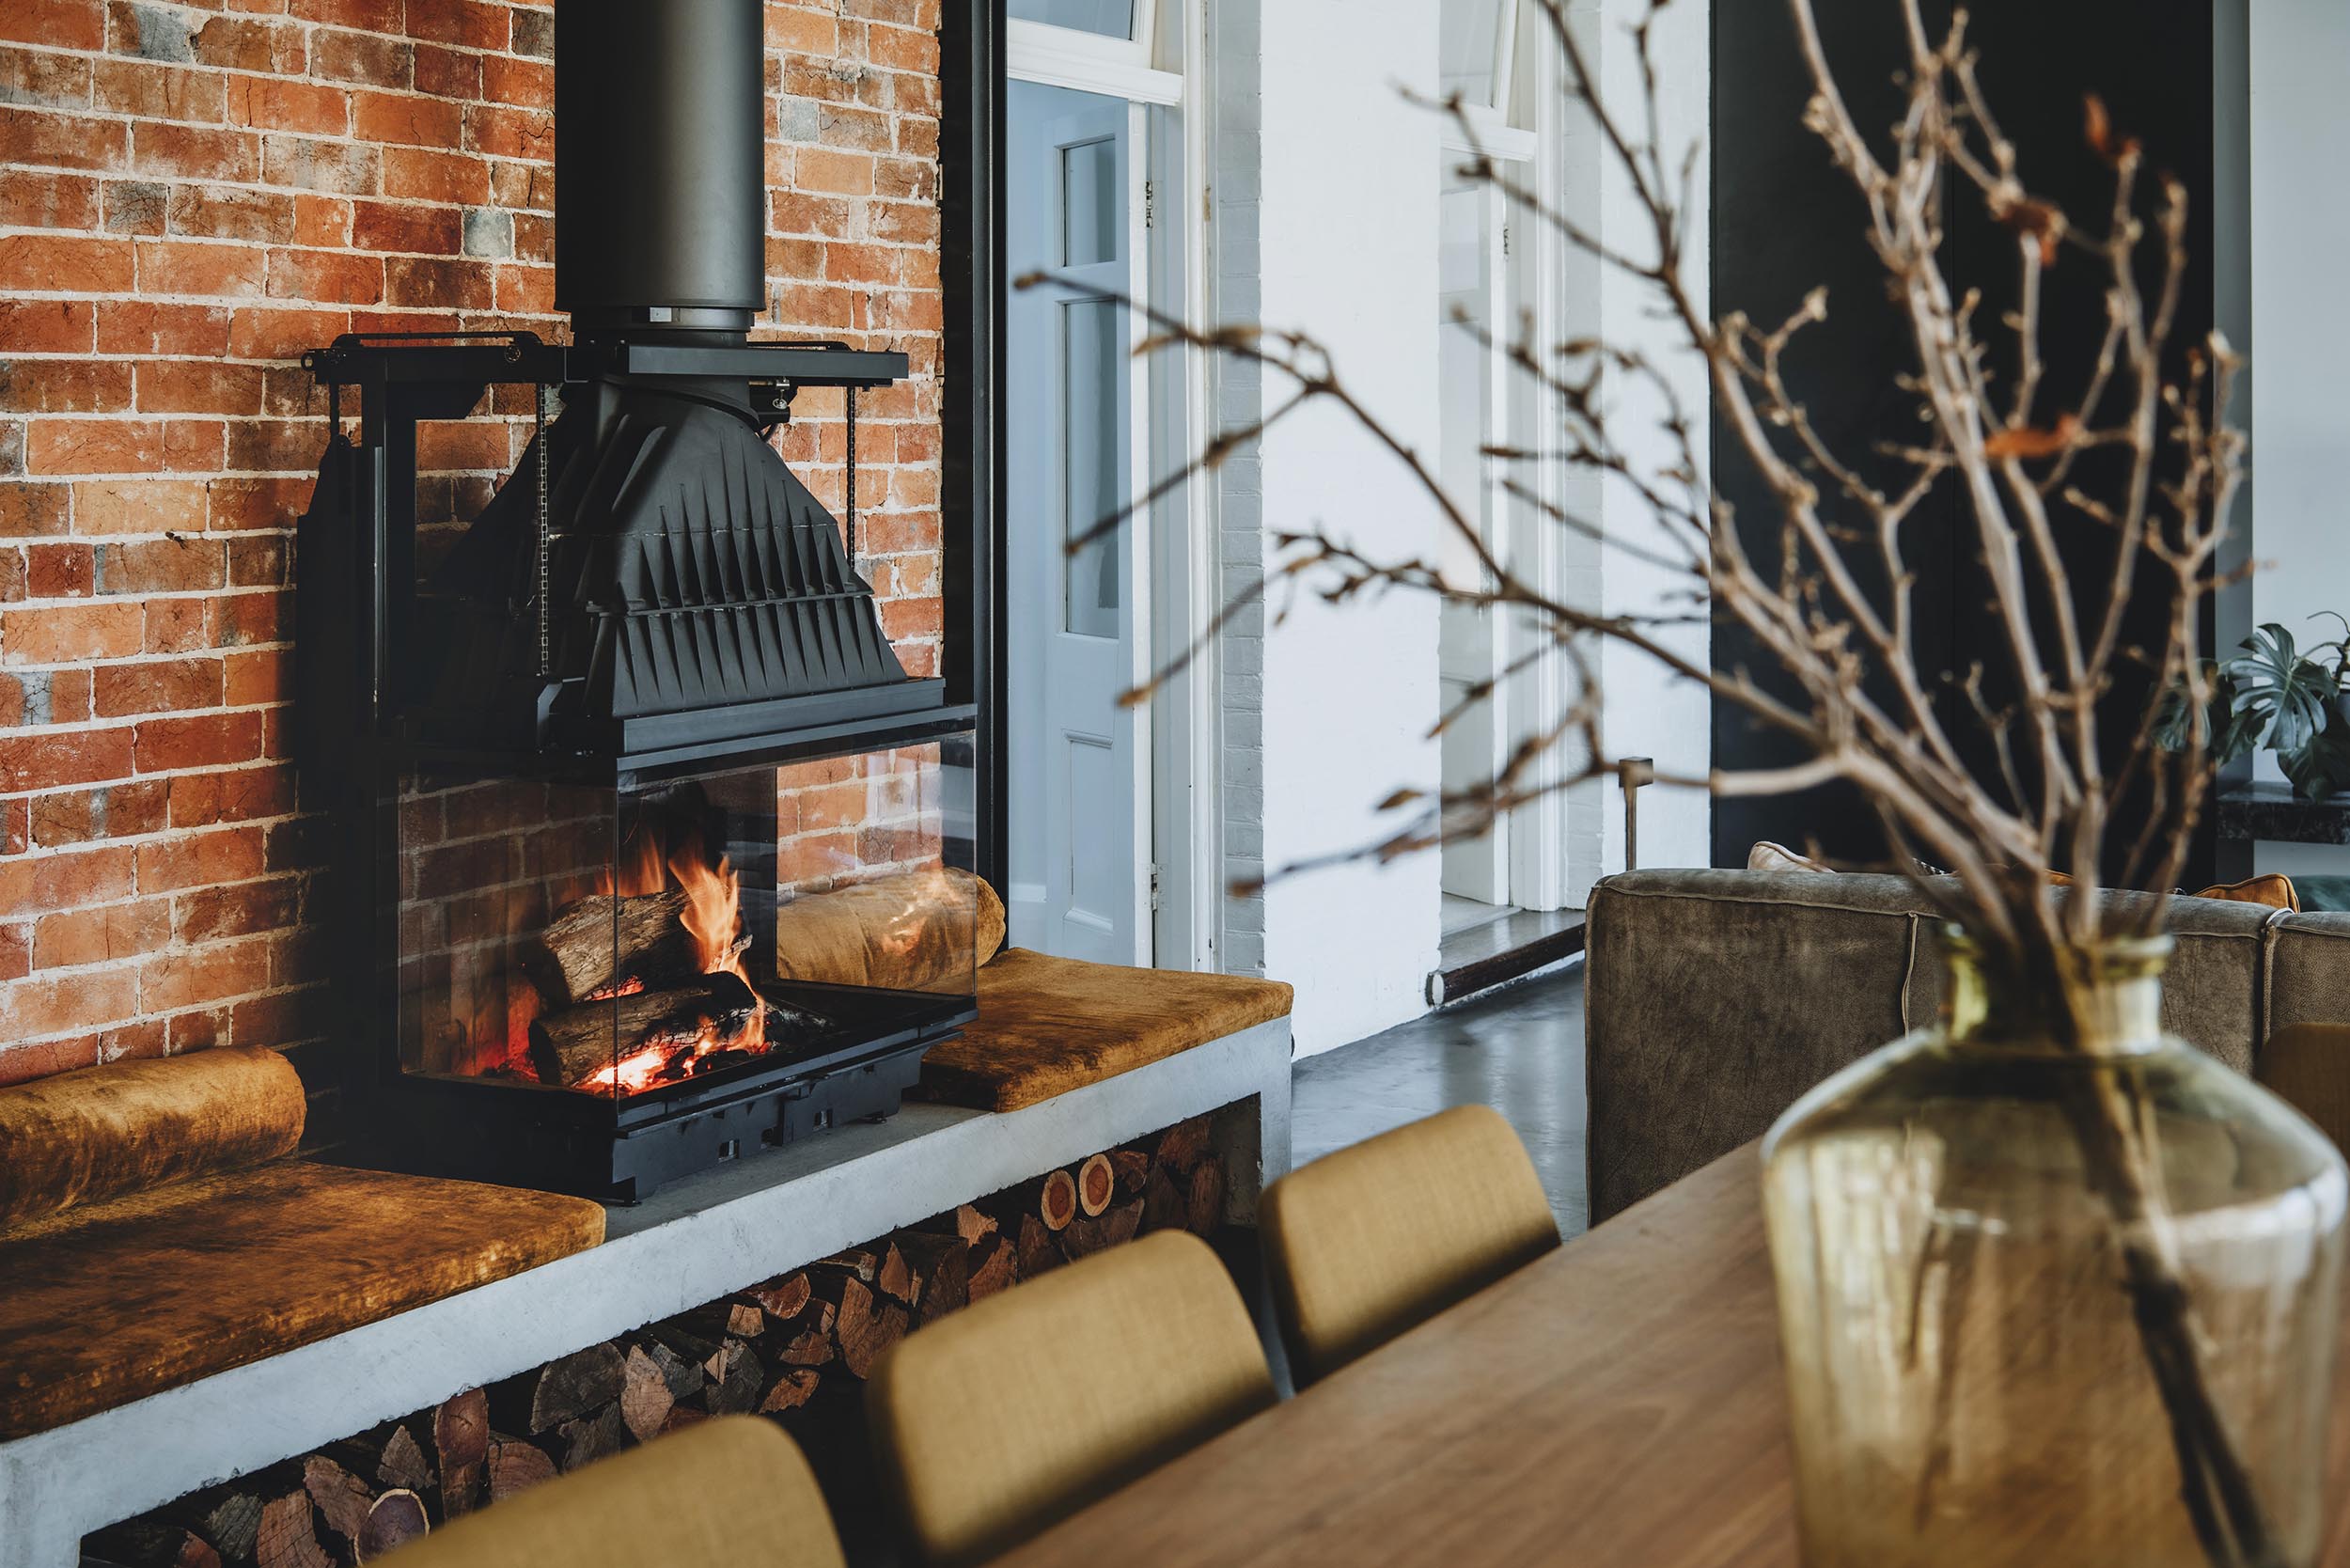 Creative ways to add a fireplace to your home